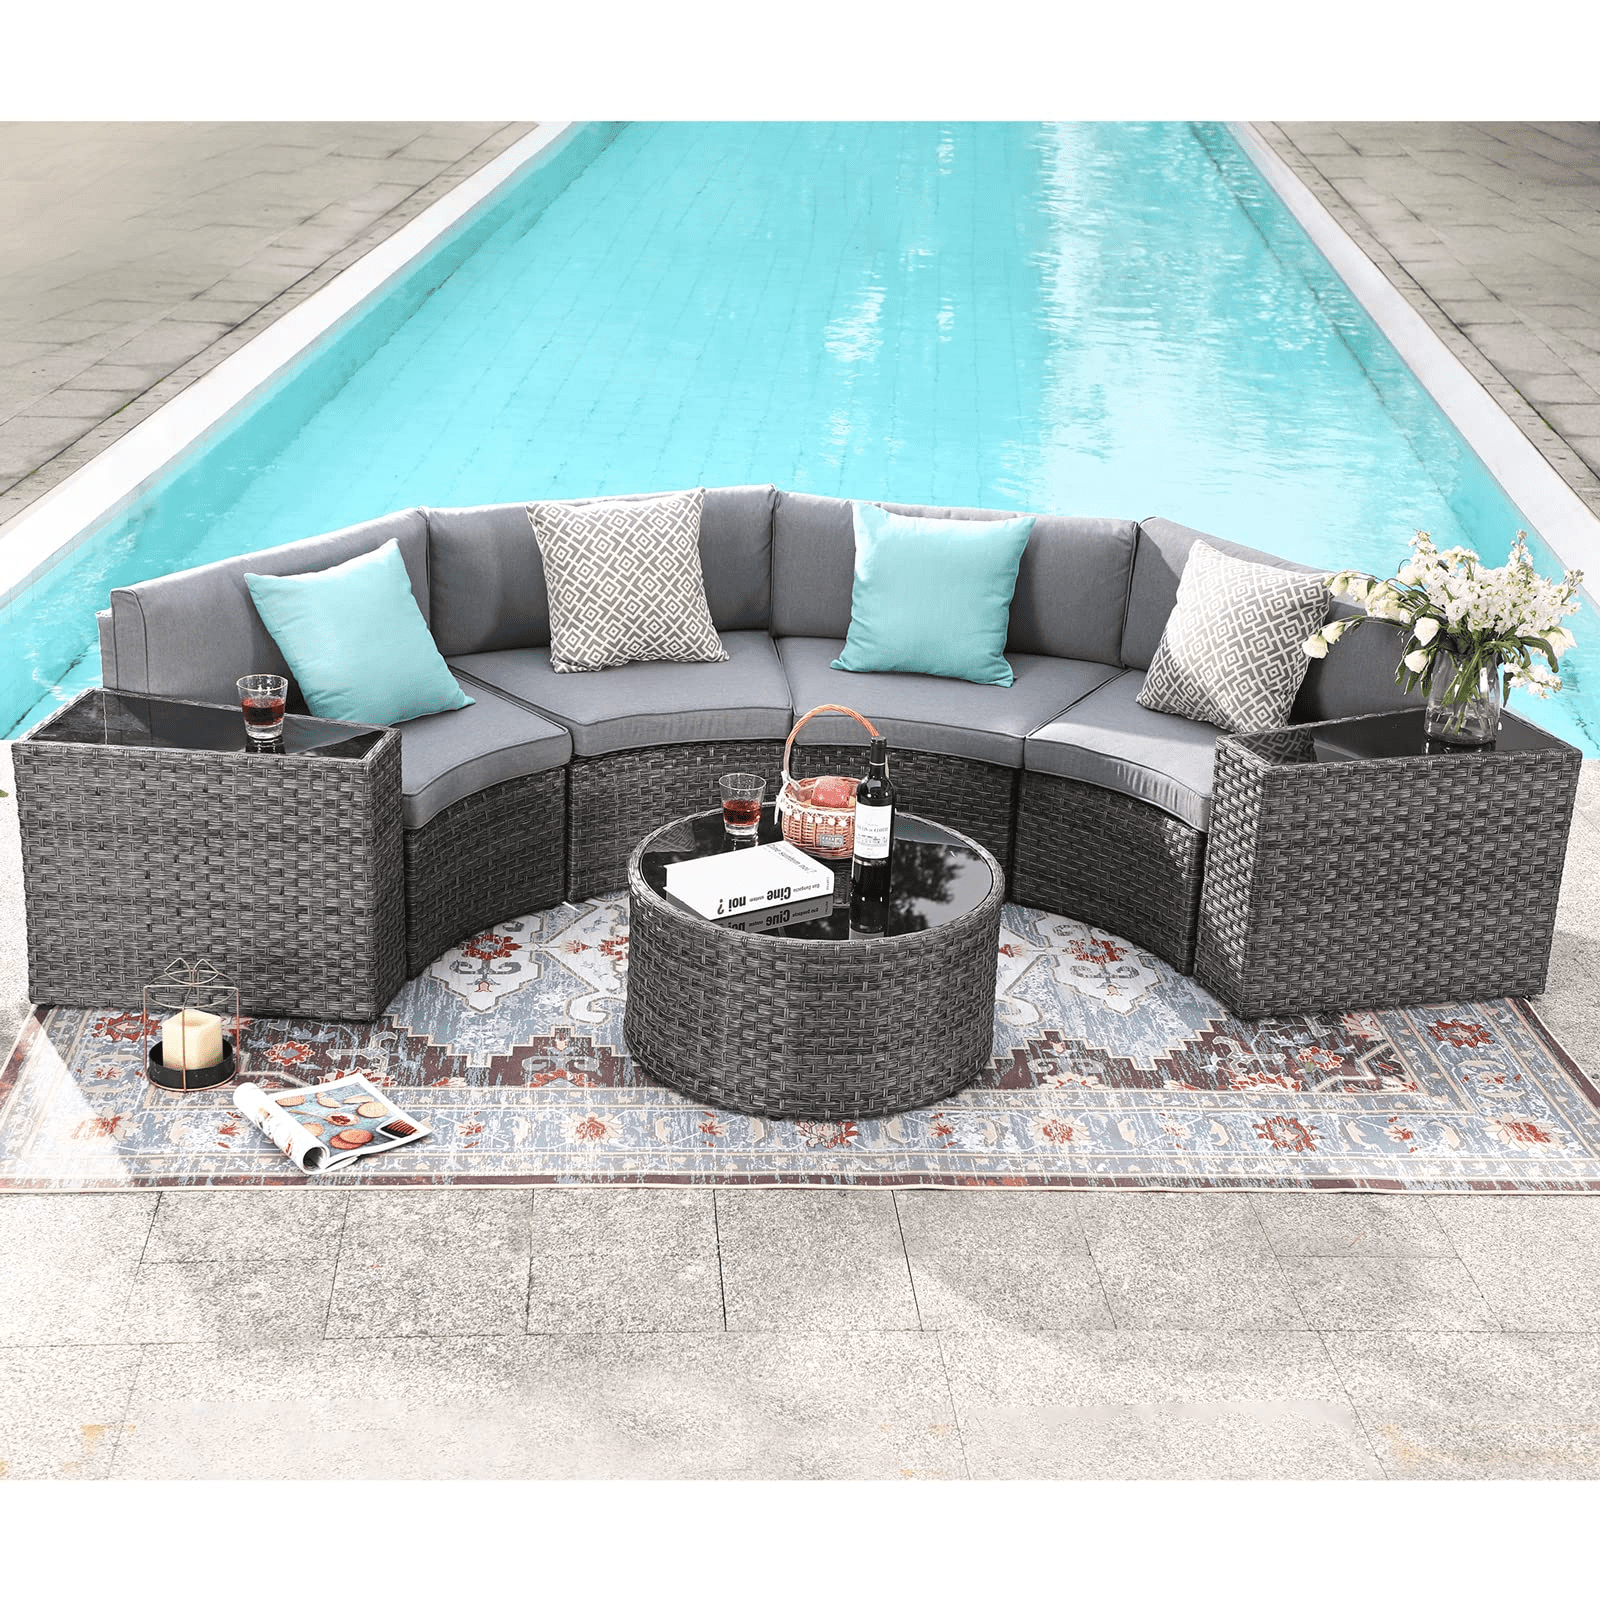 Outdoor Patio Furniture Set, Outdoor Sectional Half Moon Curved Sofa, Round  Coffee Table, 4 Pillows & Waterproof Cover, Taupe Cushion, 7 Piece –  Walmart Intended For Outdoor Half Round Coffee Tables (View 2 of 15)